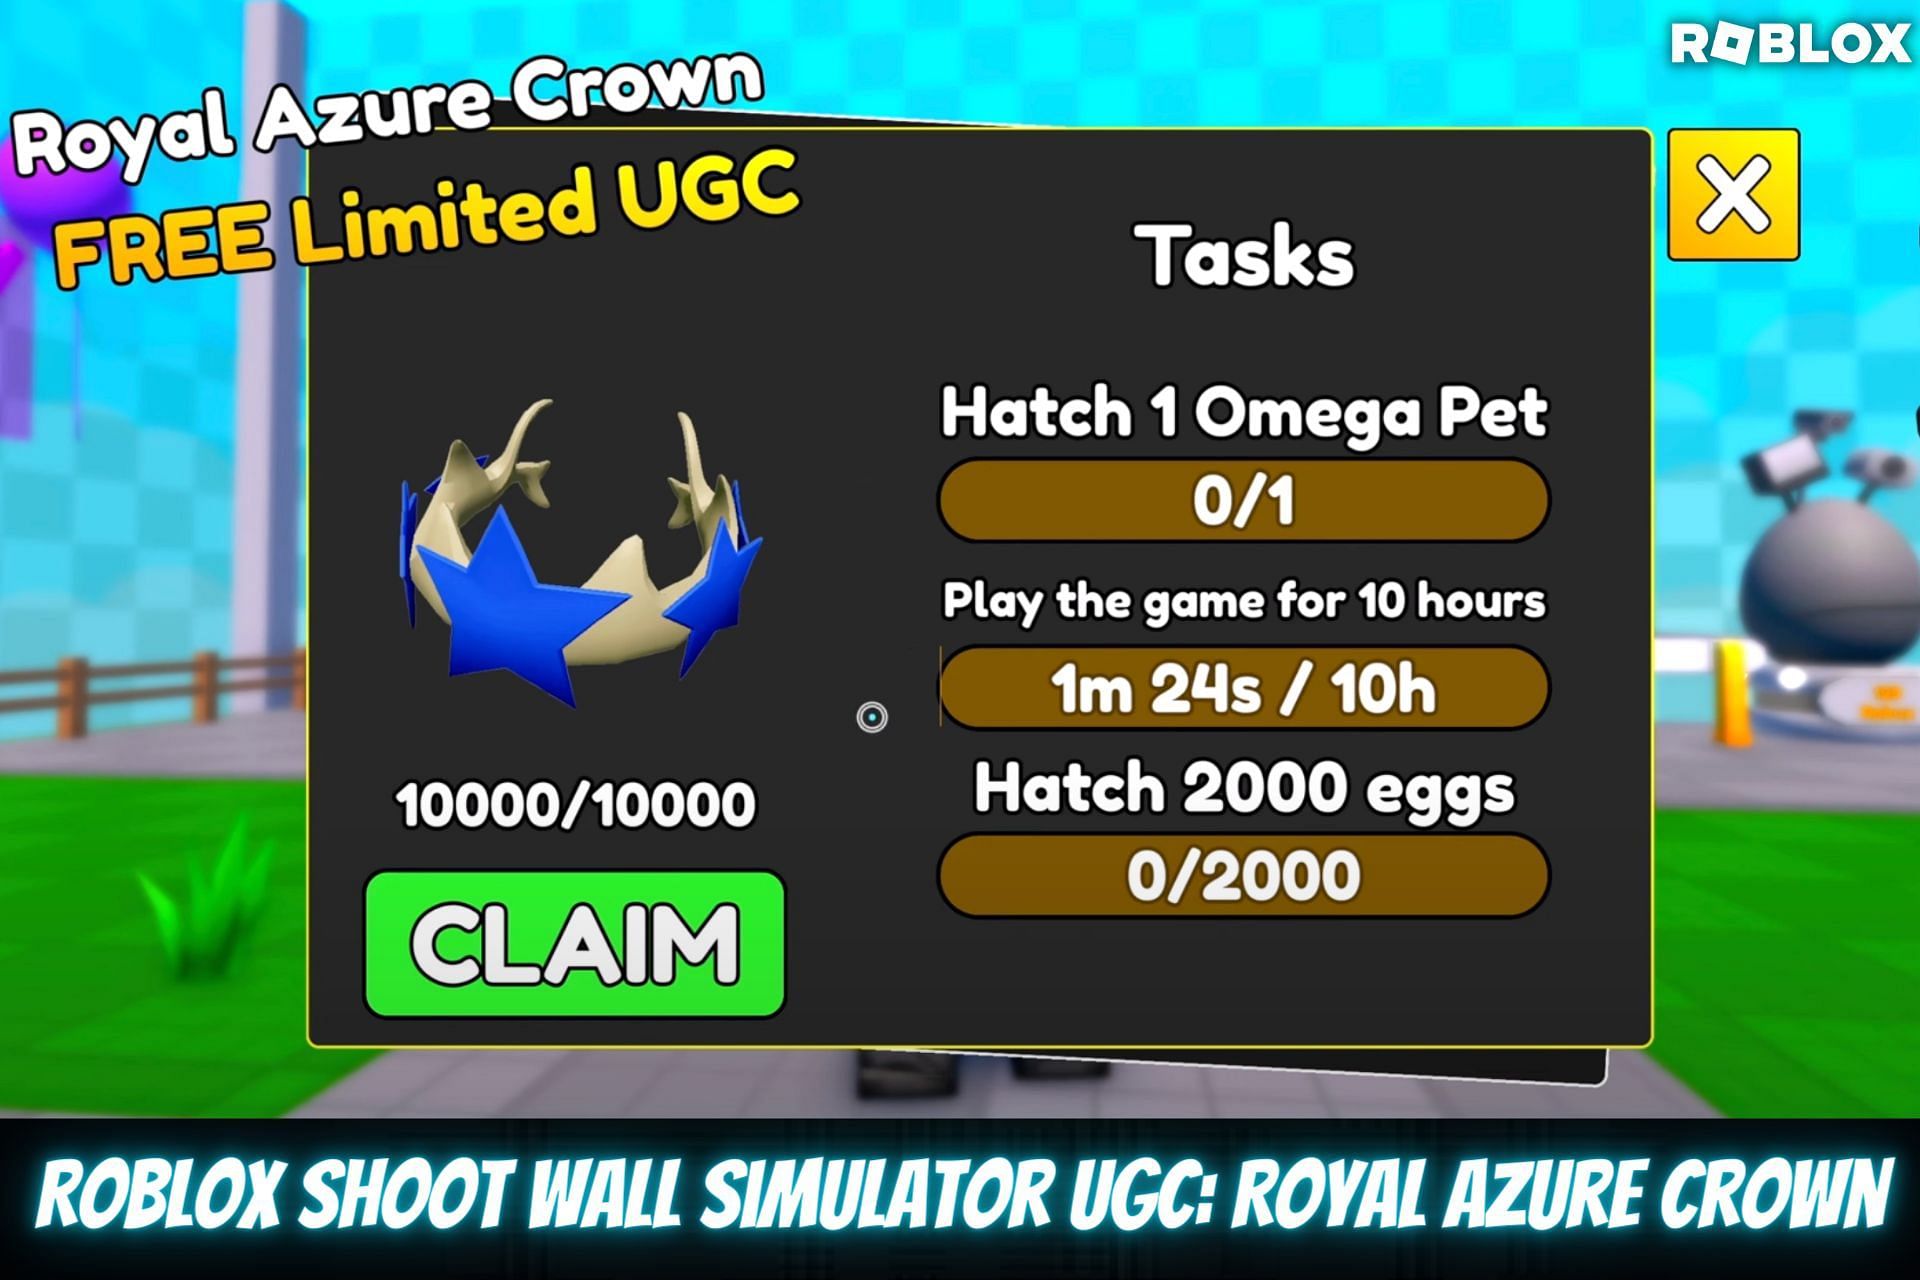 In-Game FREE UGC Limited